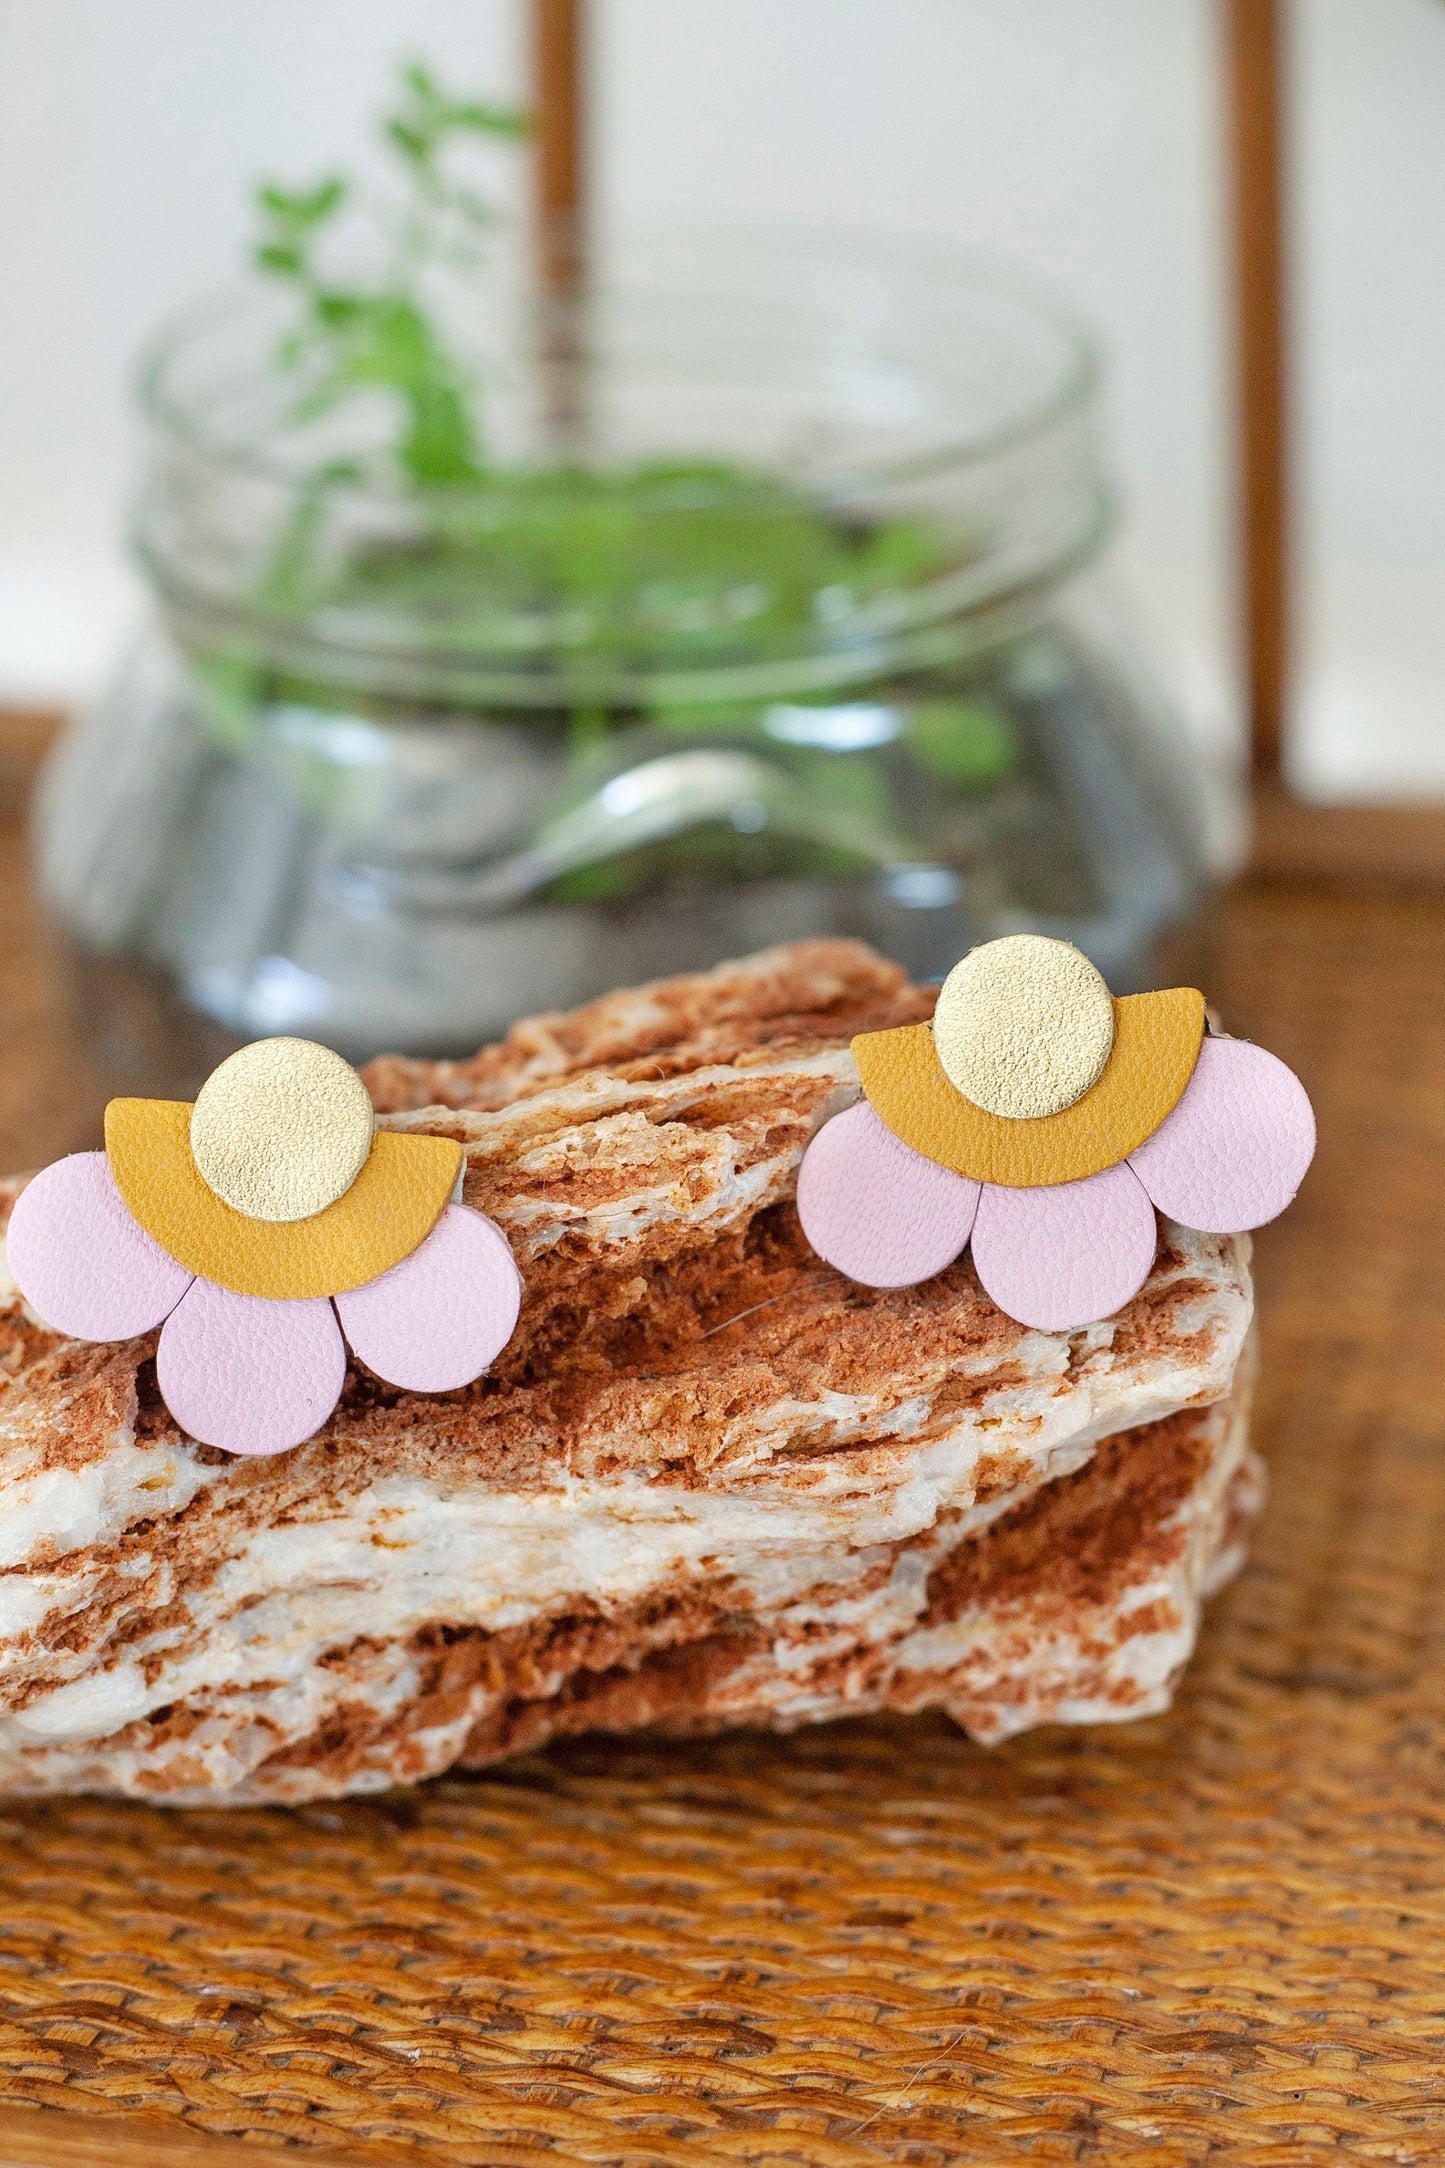 Semi-circle flower earrings in pink and mustard yellow leather